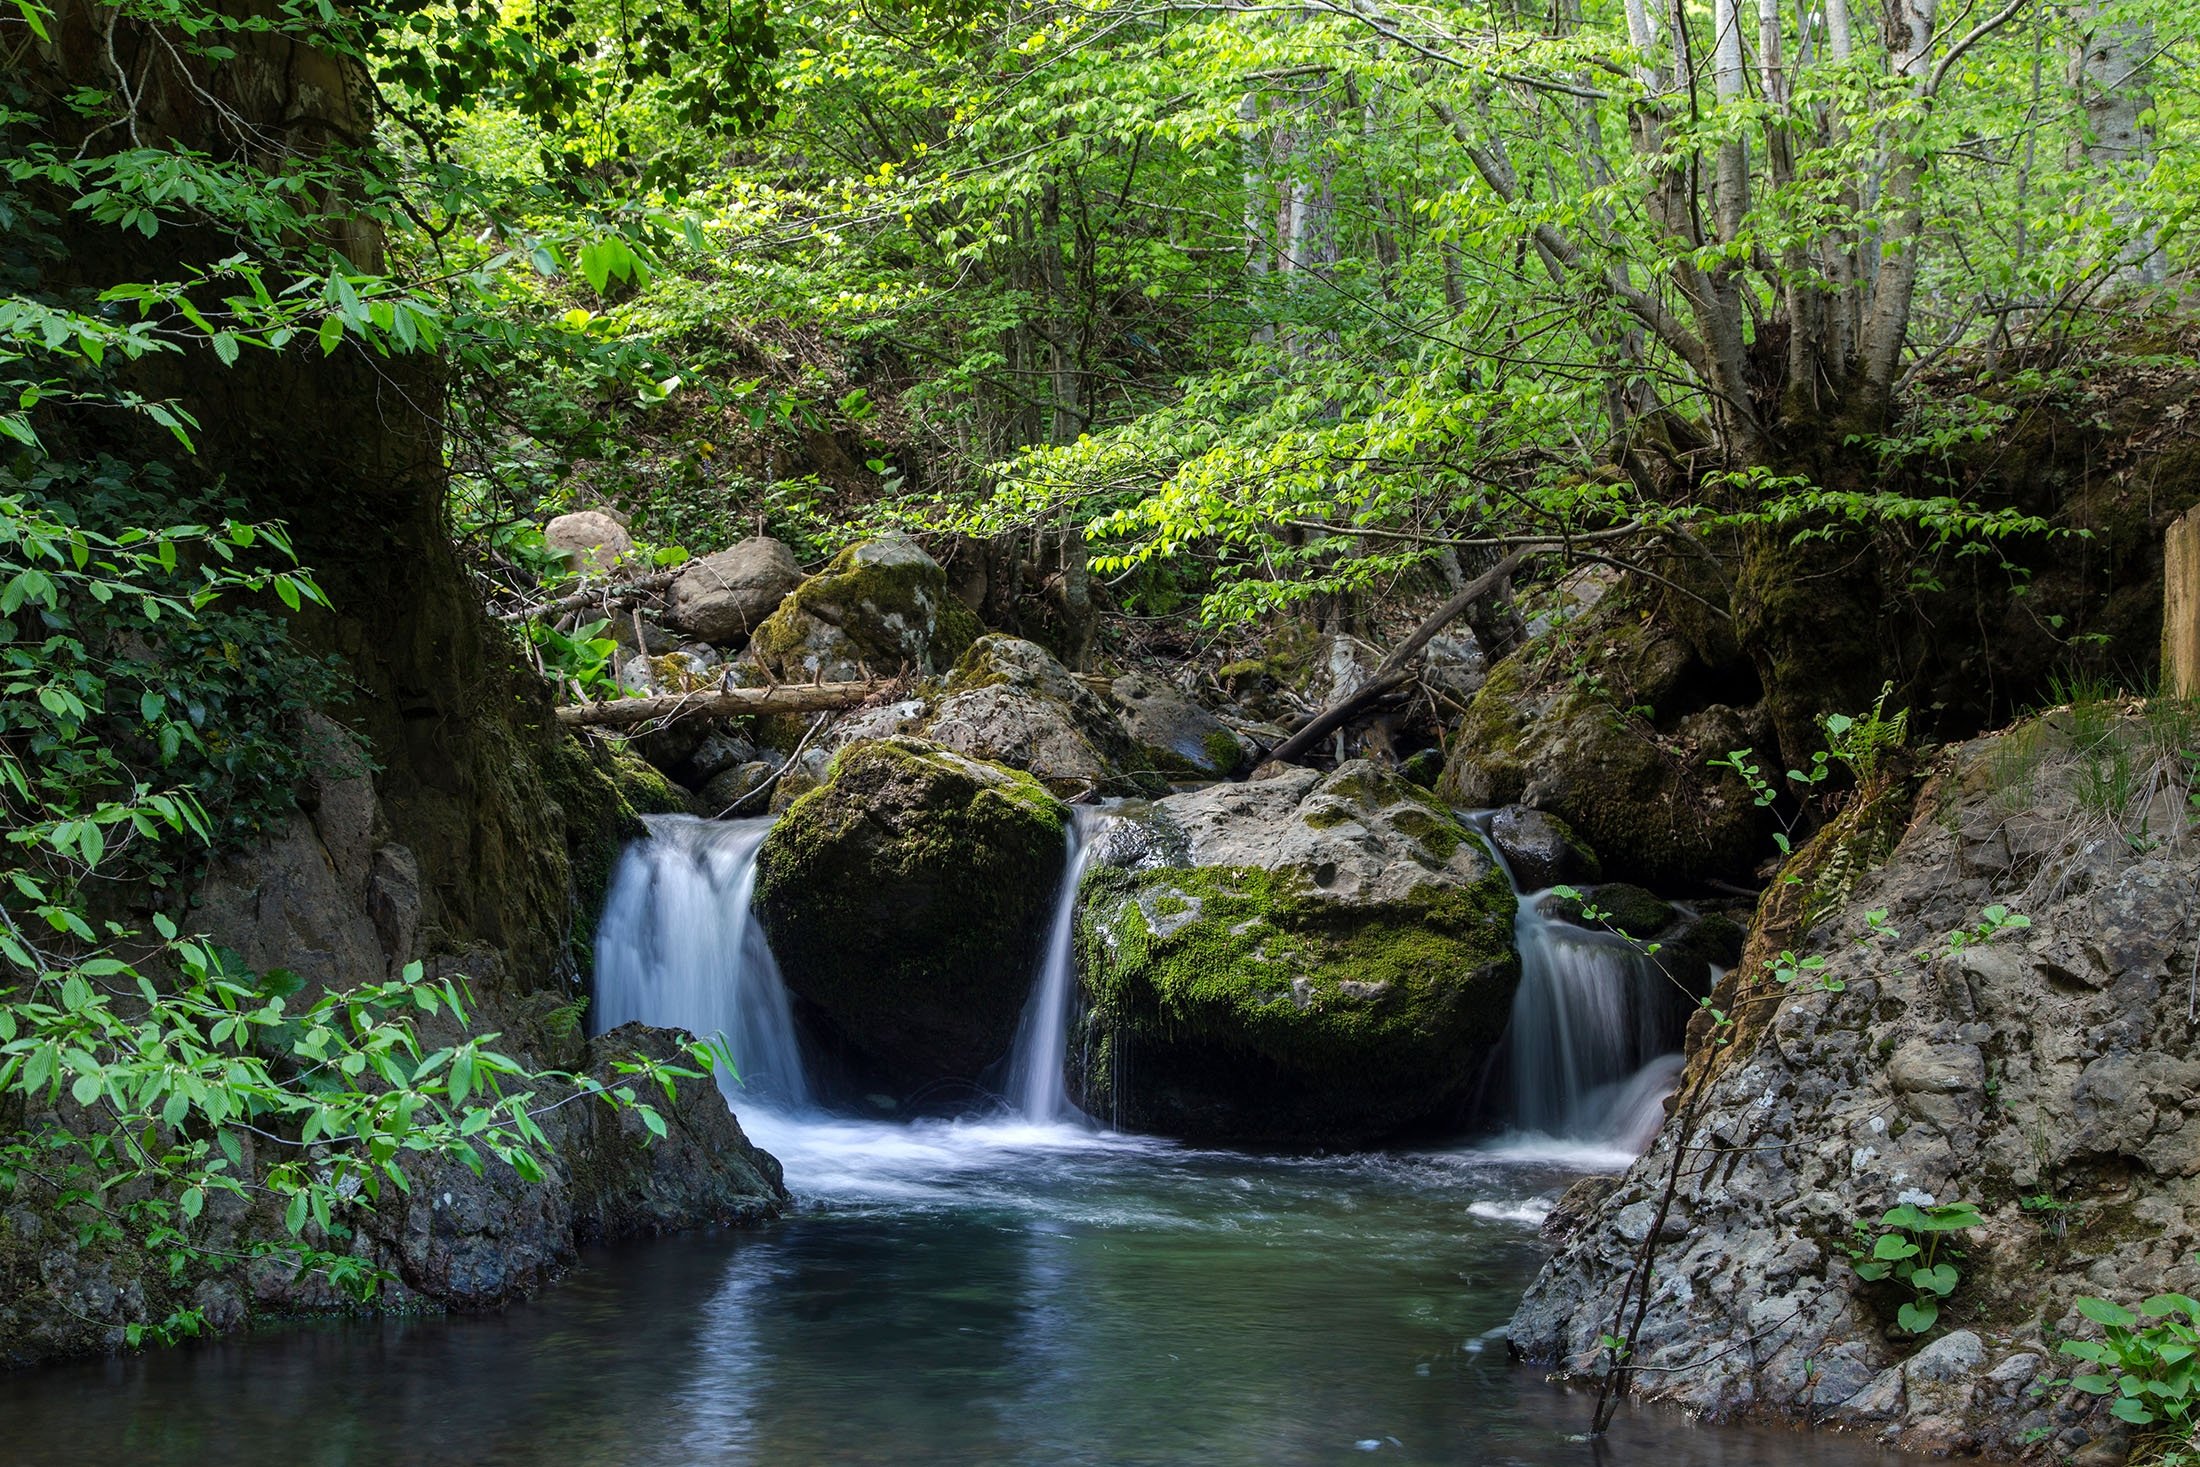  Yenice Ormanları is a unique forested region that has a wide diversity of flora and fauna. (Shutterstock Photo) 